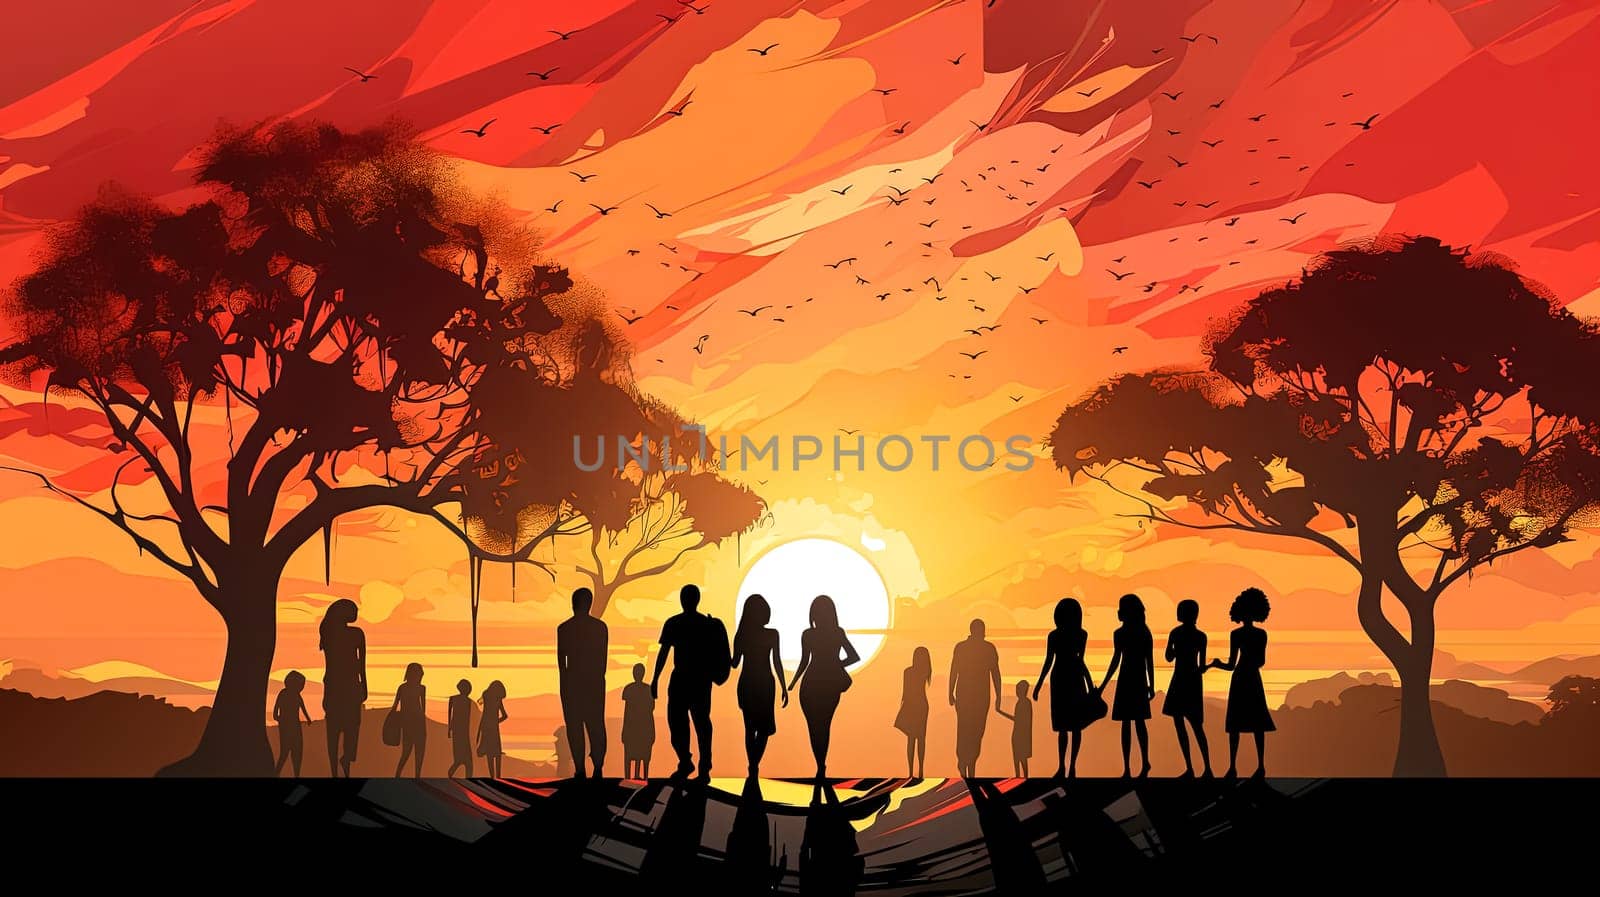 Celebrate love with a Valentines Day illustration featuring silhouettes of people by Alla_Morozova93